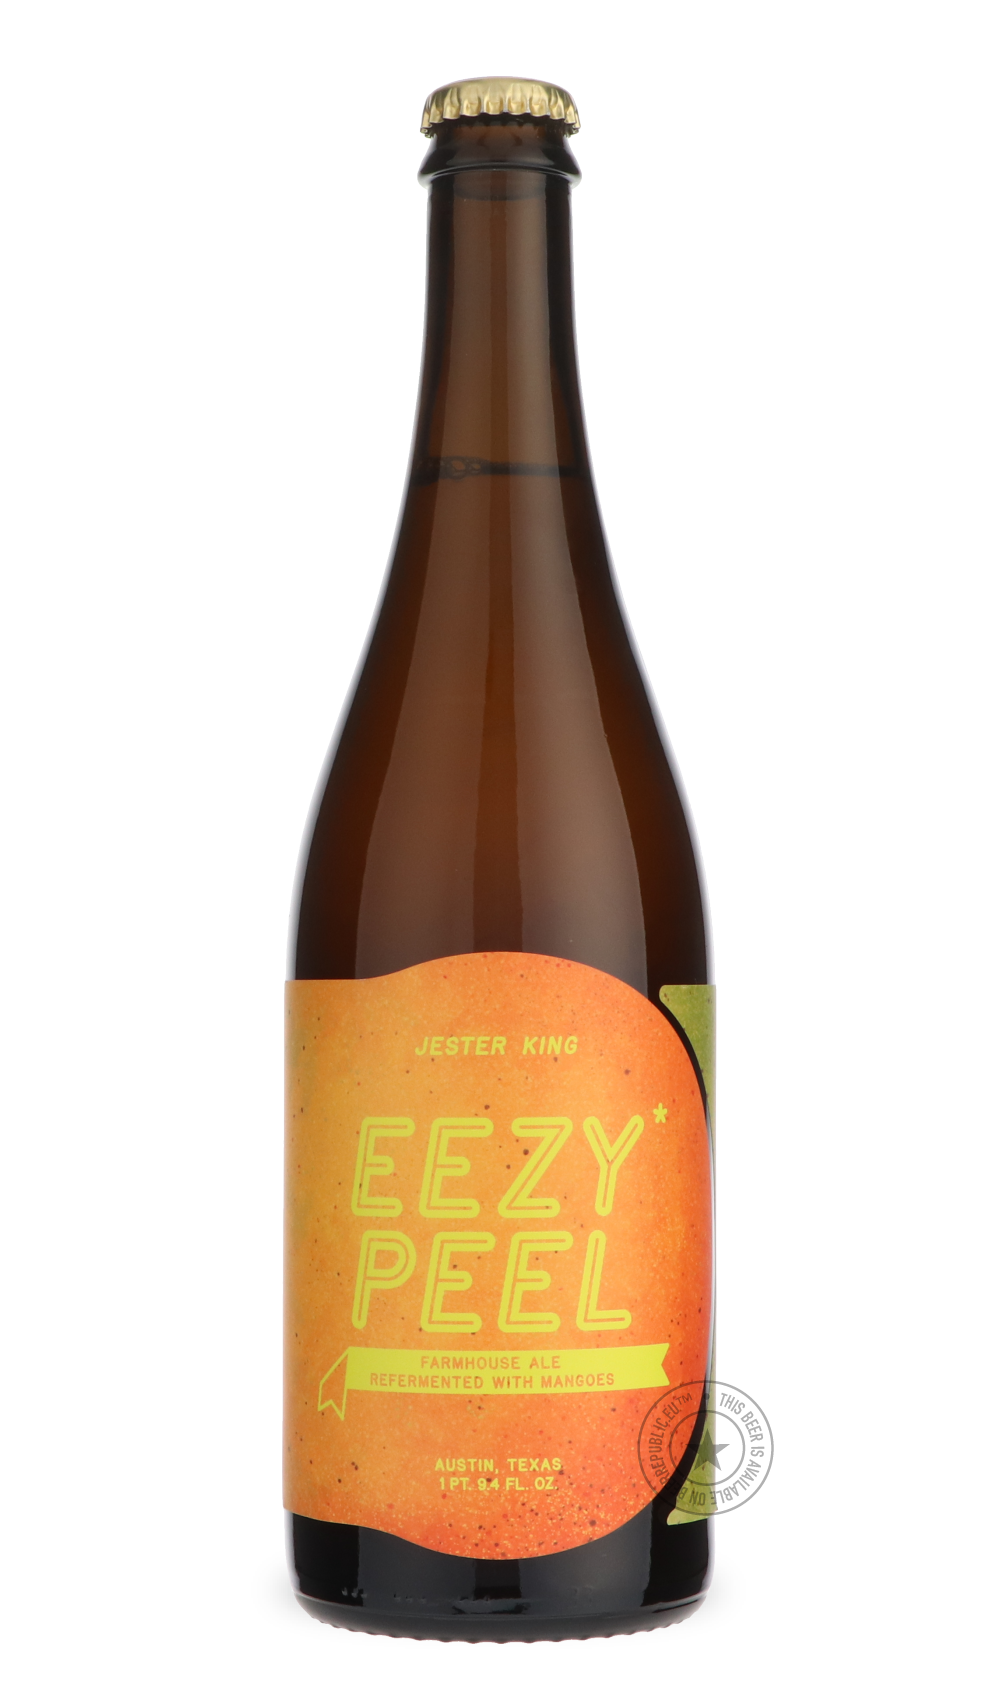 -Jester King- Eezy Peel-Sour / Wild & Fruity- Only @ Beer Republic - The best online beer store for American & Canadian craft beer - Buy beer online from the USA and Canada - Bier online kopen - Amerikaans bier kopen - Craft beer store - Craft beer kopen - Amerikanisch bier kaufen - Bier online kaufen - Acheter biere online - IPA - Stout - Porter - New England IPA - Hazy IPA - Imperial Stout - Barrel Aged - Barrel Aged Imperial Stout - Brown - Dark beer - Blond - Blonde - Pilsner - Lager - Wheat - Weizen - 